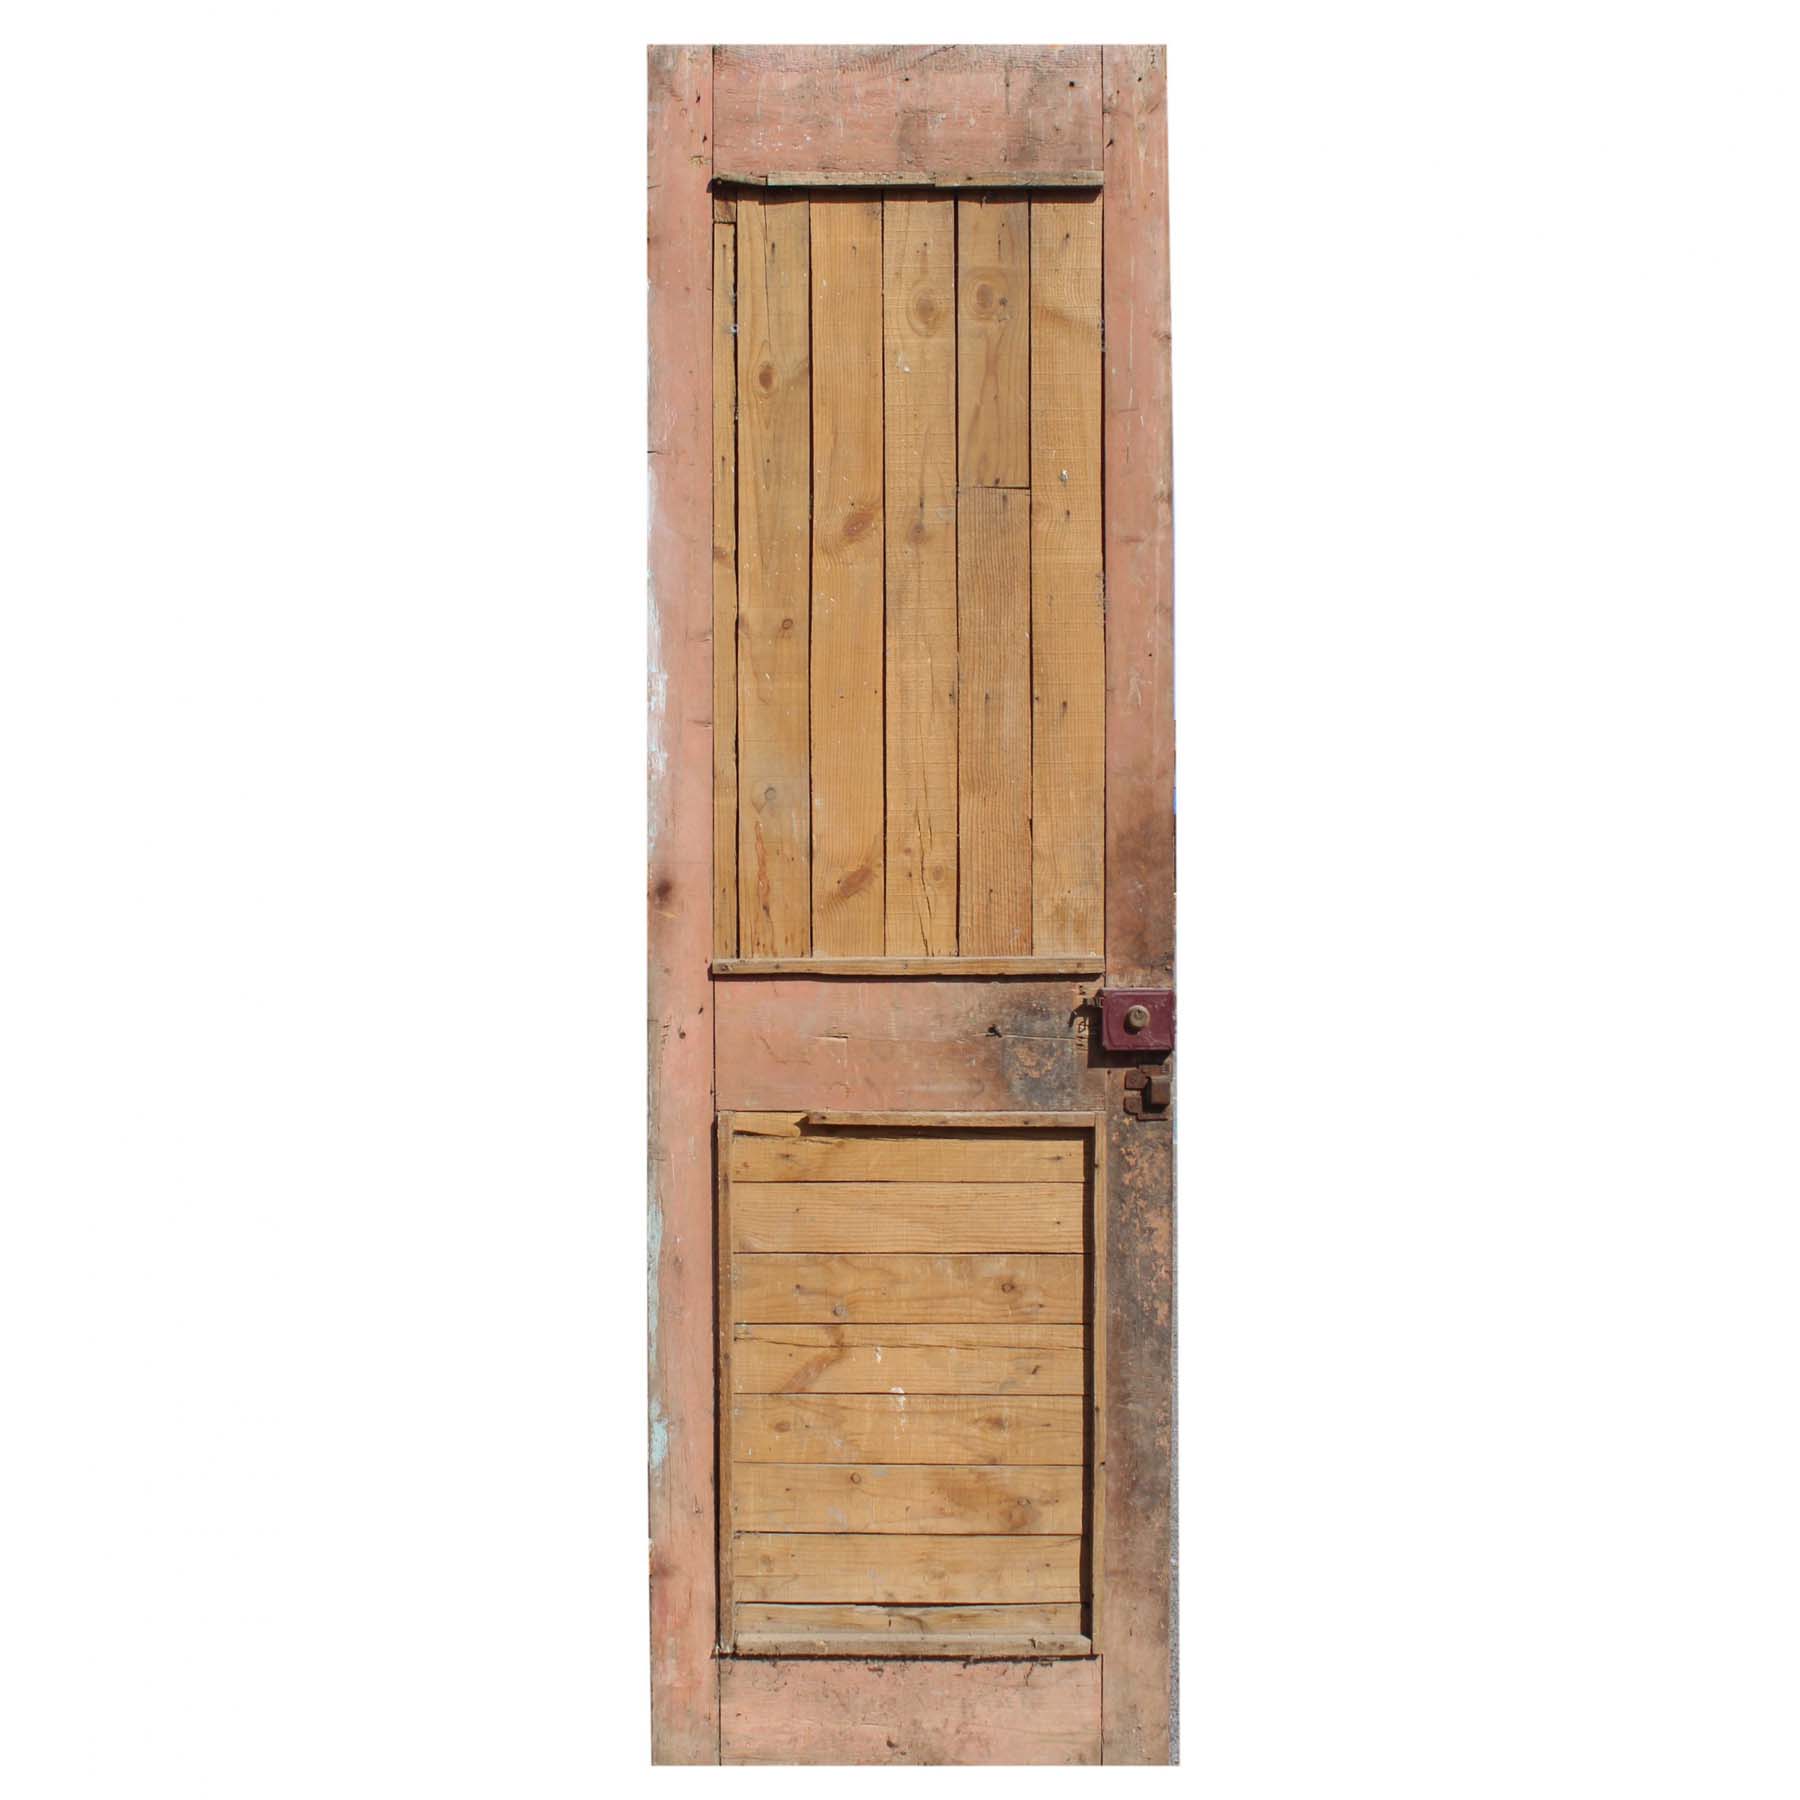 SOLD Salvaged 29” Door with Carved Details-69151